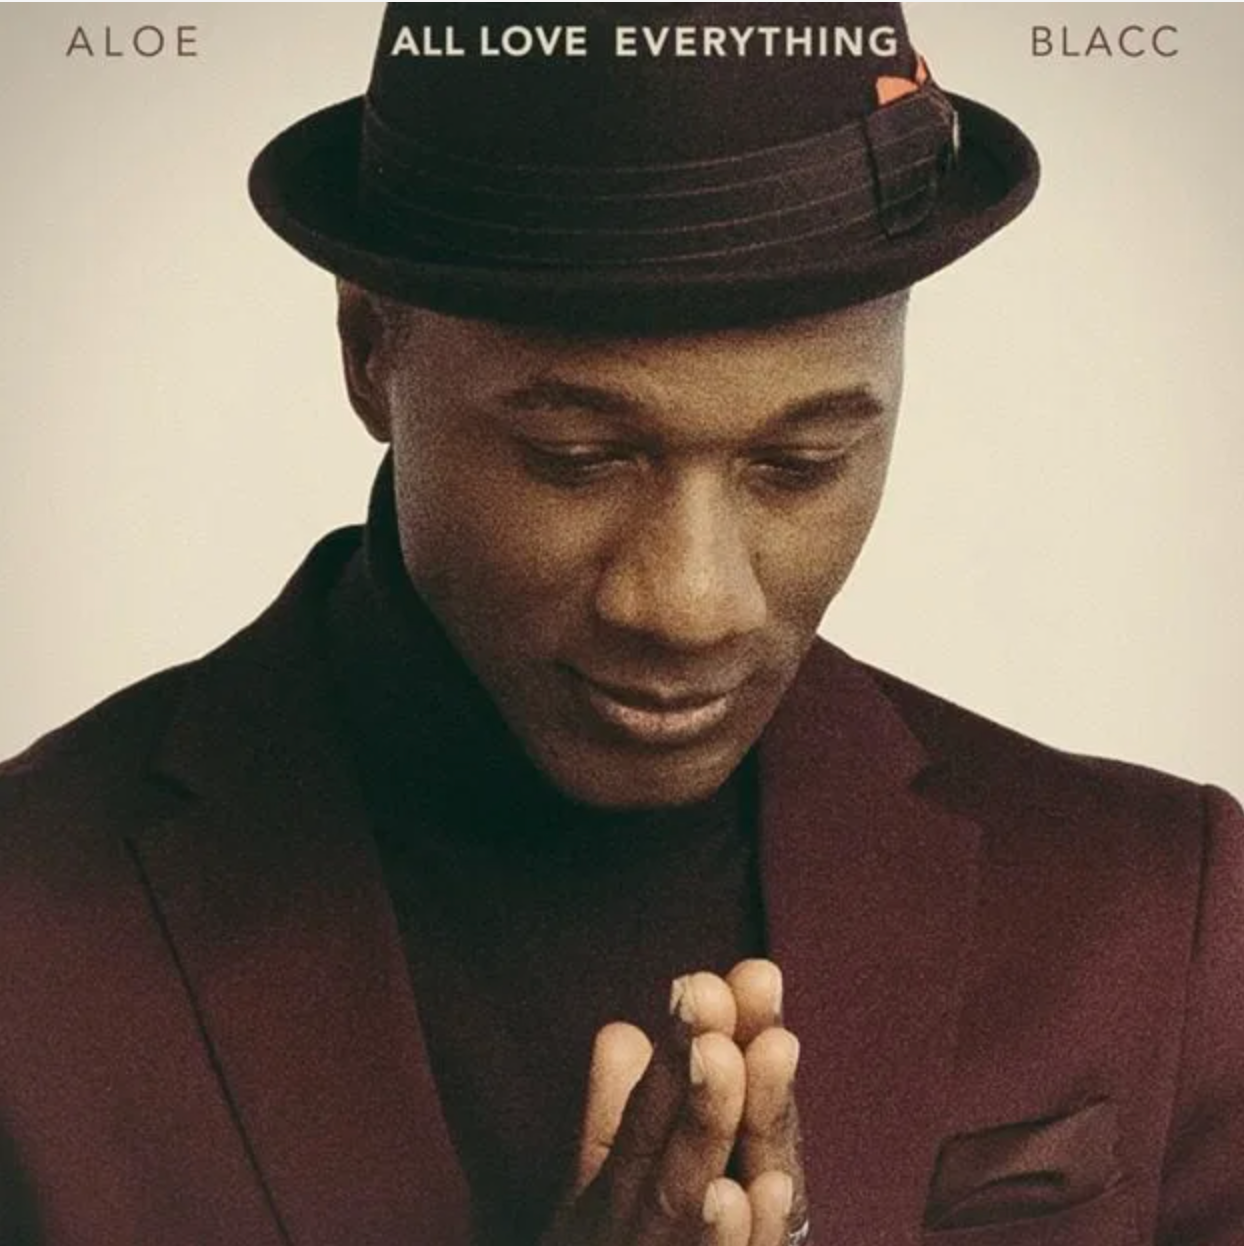 New Aloe Blacc Album ‘All Love Everything’ Out Now